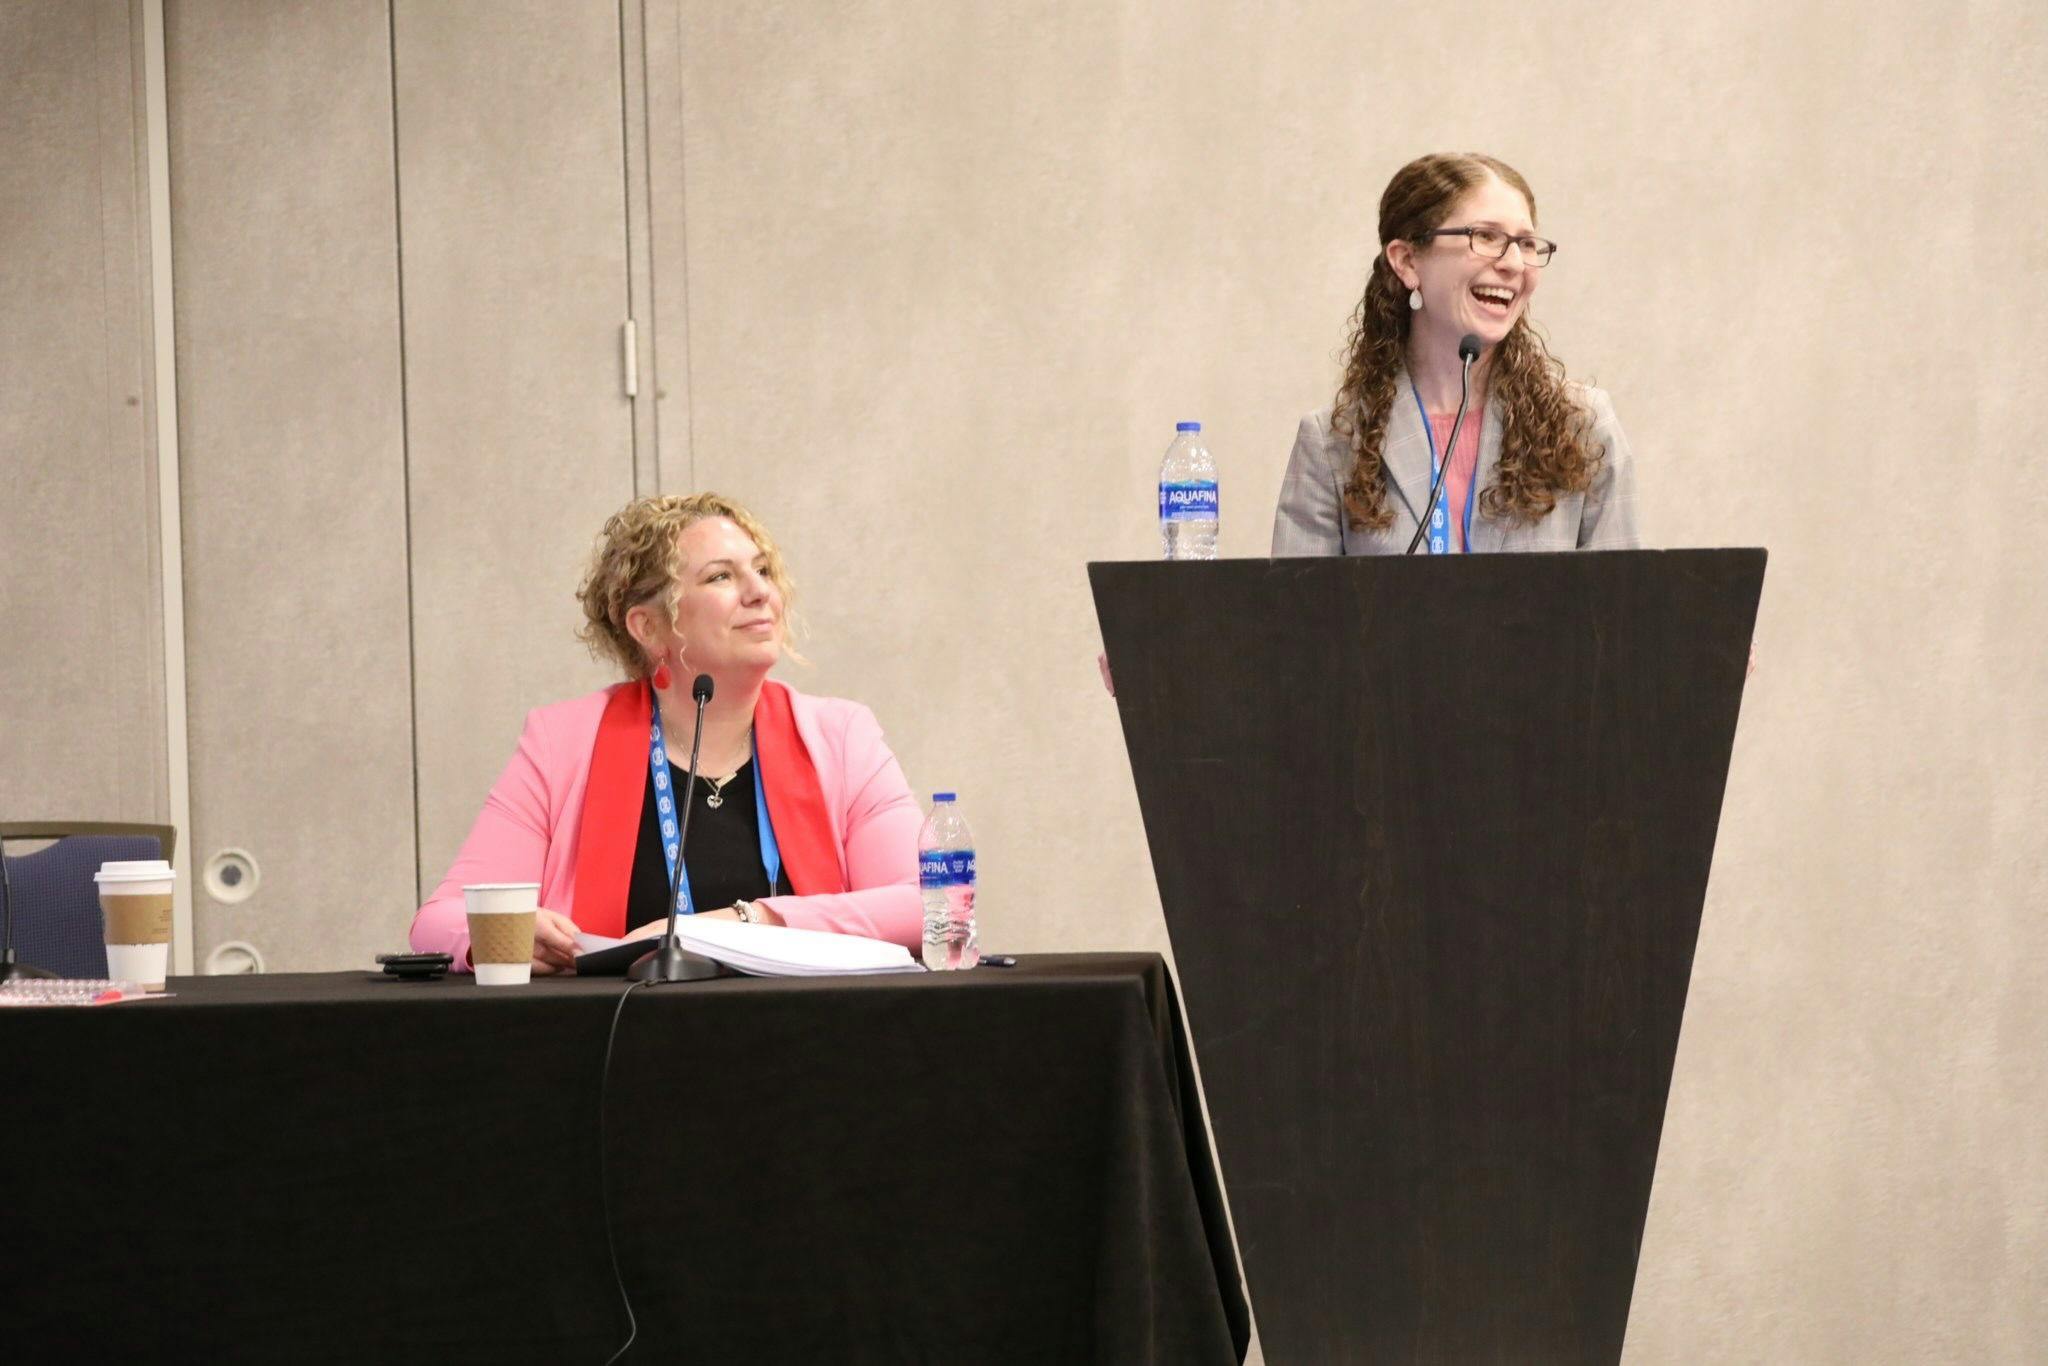 Amy Sullivan, PsyD (left), and Carrie M. Hersh, DO, MSc (right, at podium) address the room at CMSC about burnout.
Image courtesy: Shmulik Almany